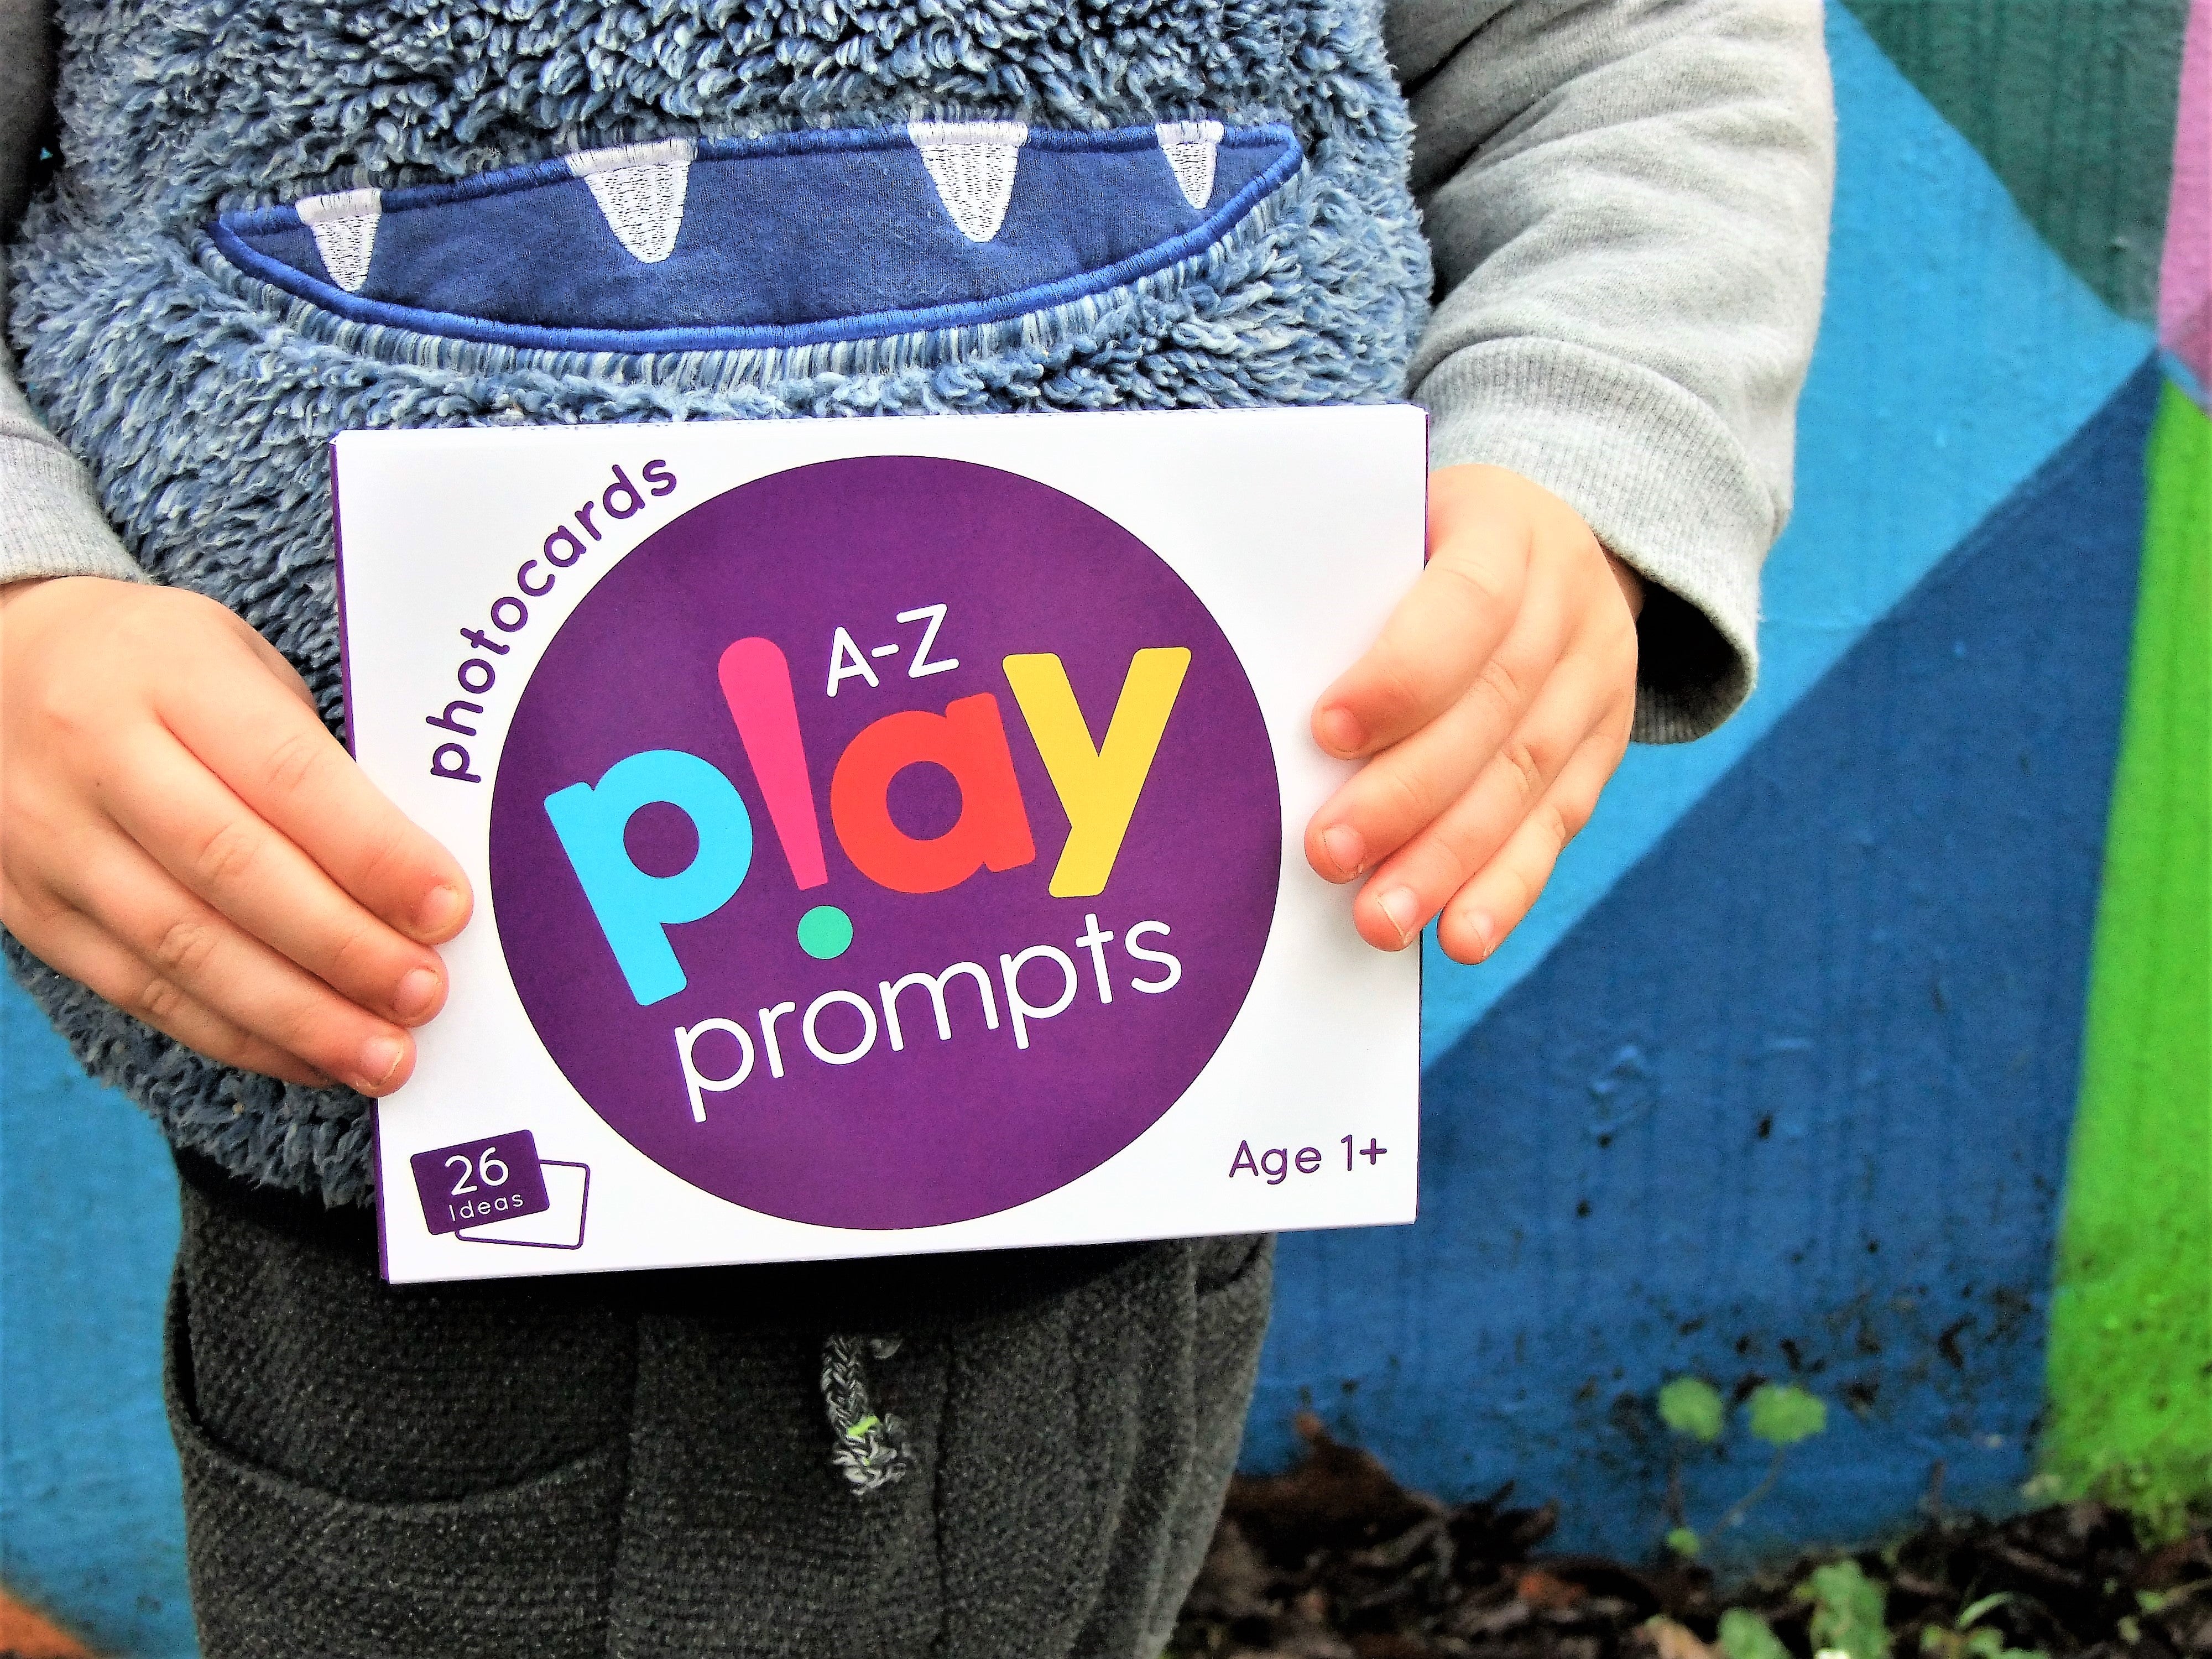 A-Z of playPROMPTS for kids aged 1+ - playHOORAY!